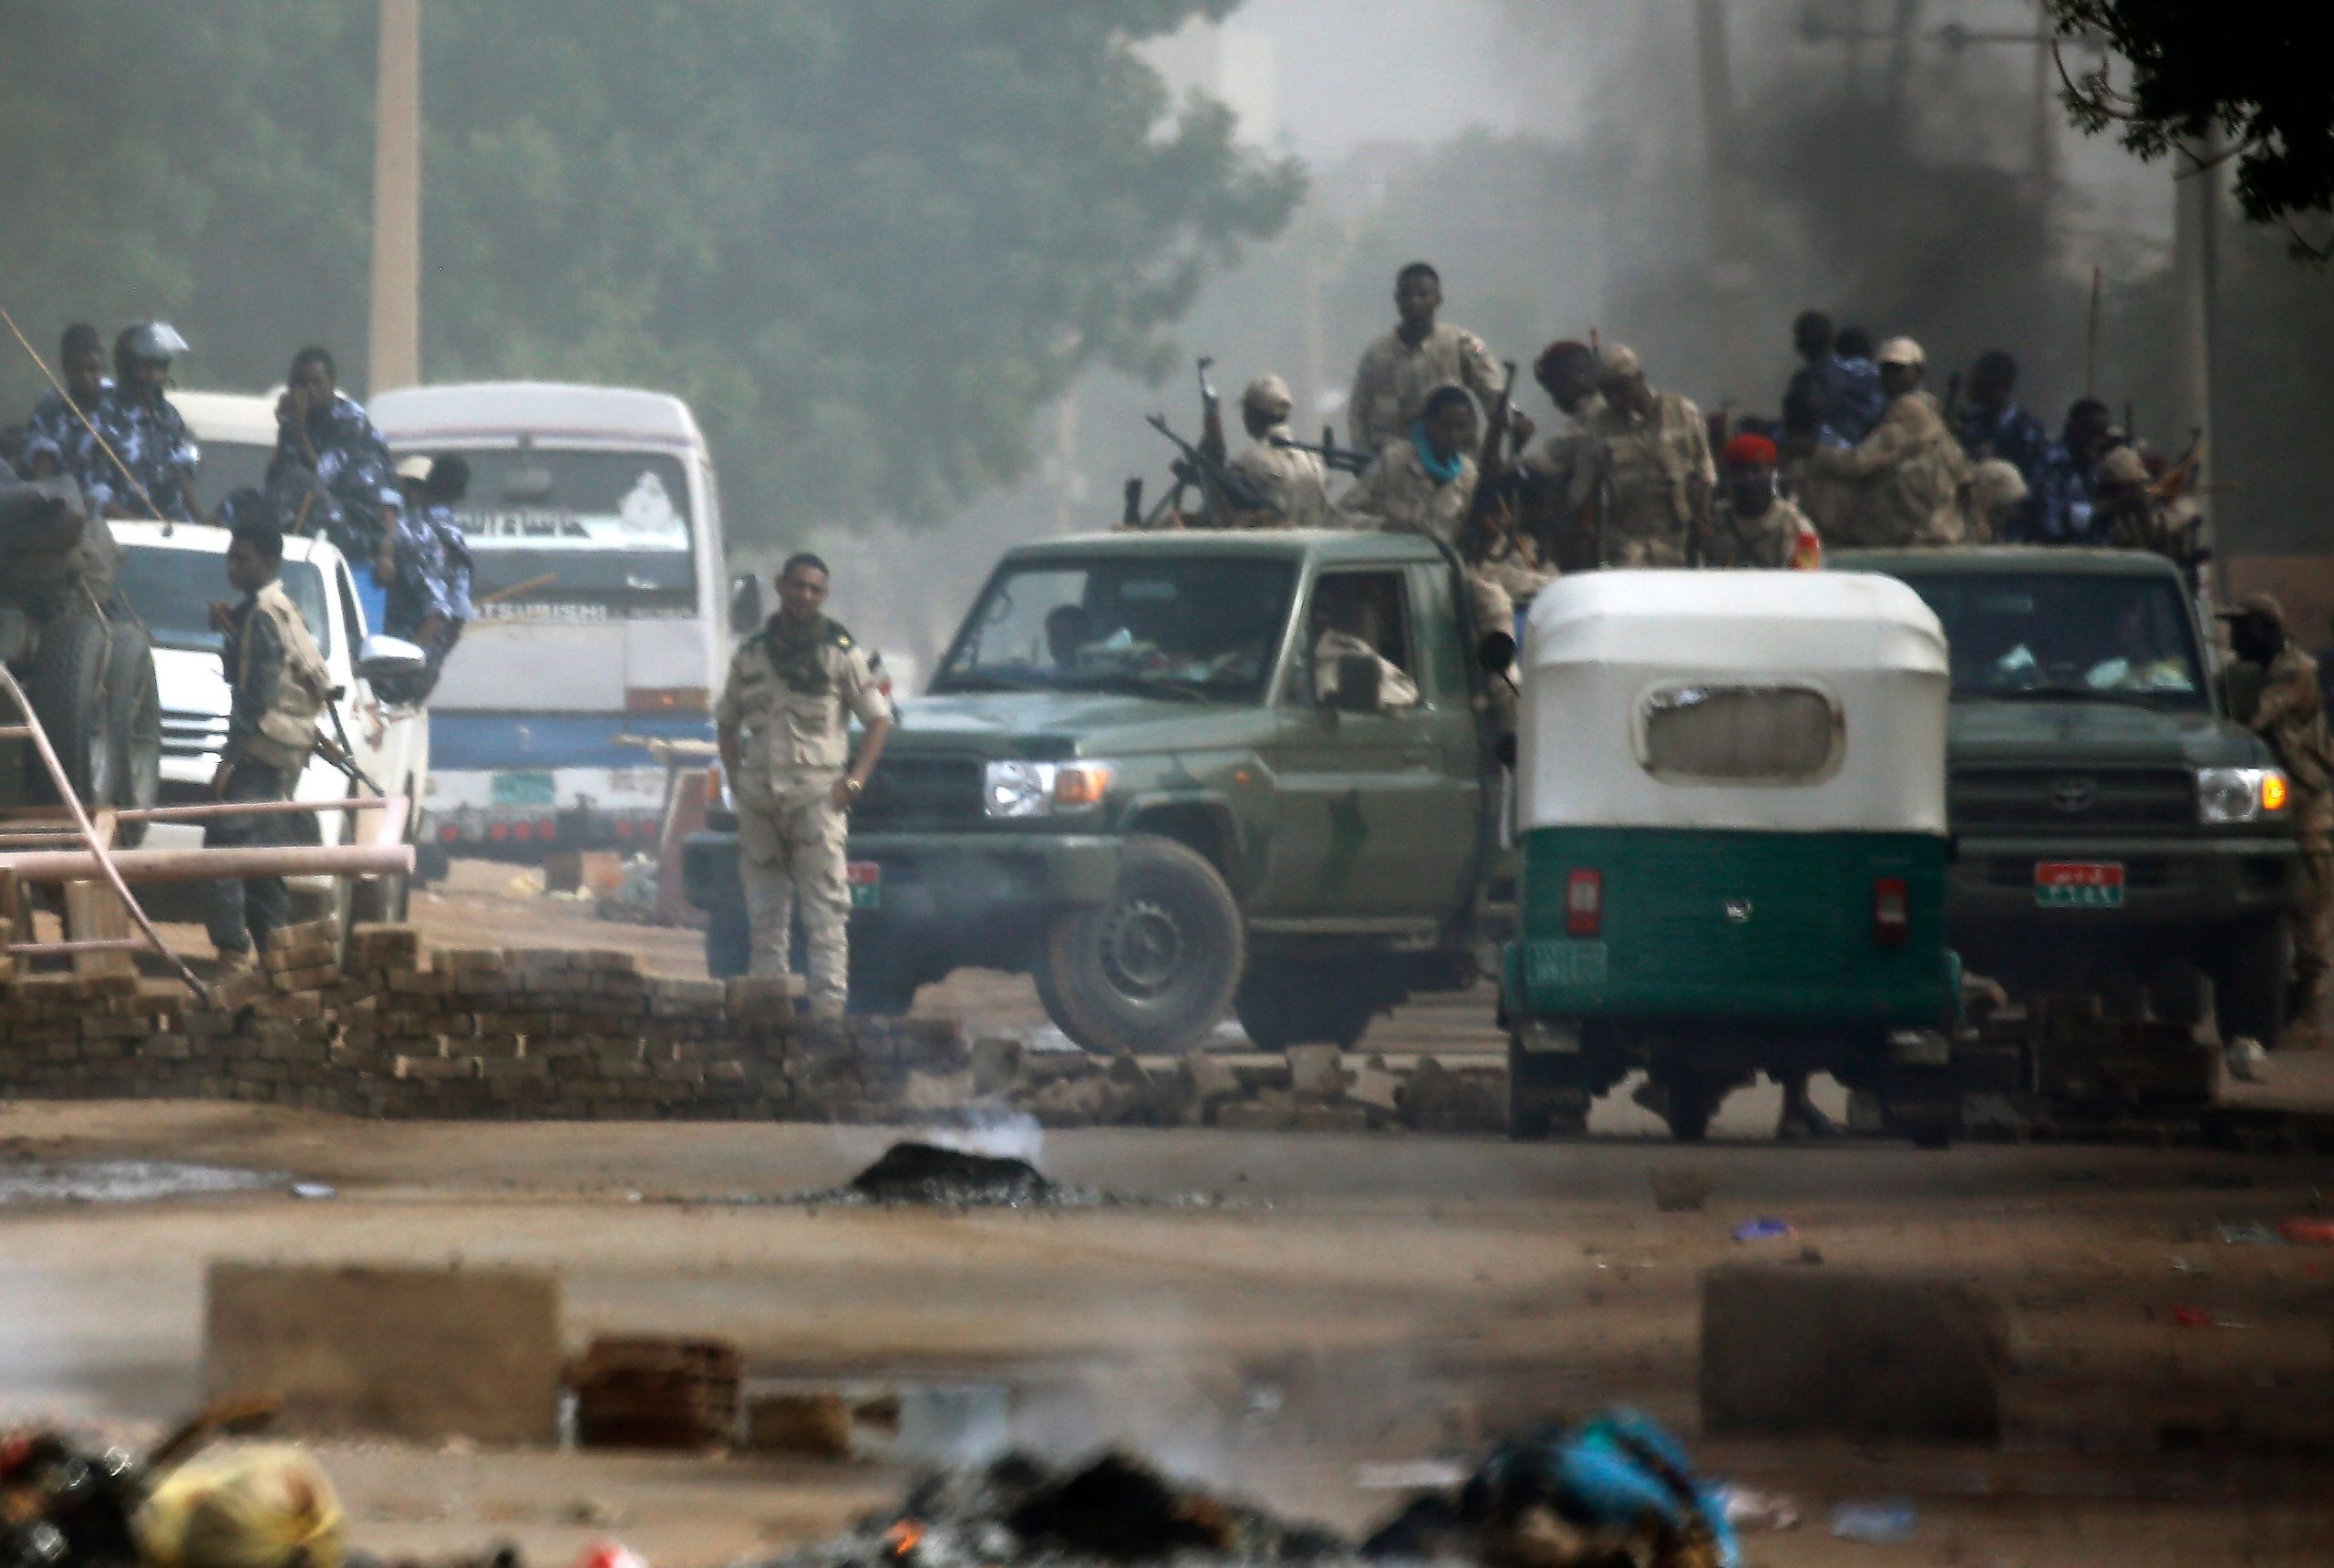 Sudan: All security agencies that attacked protesters must be held to account